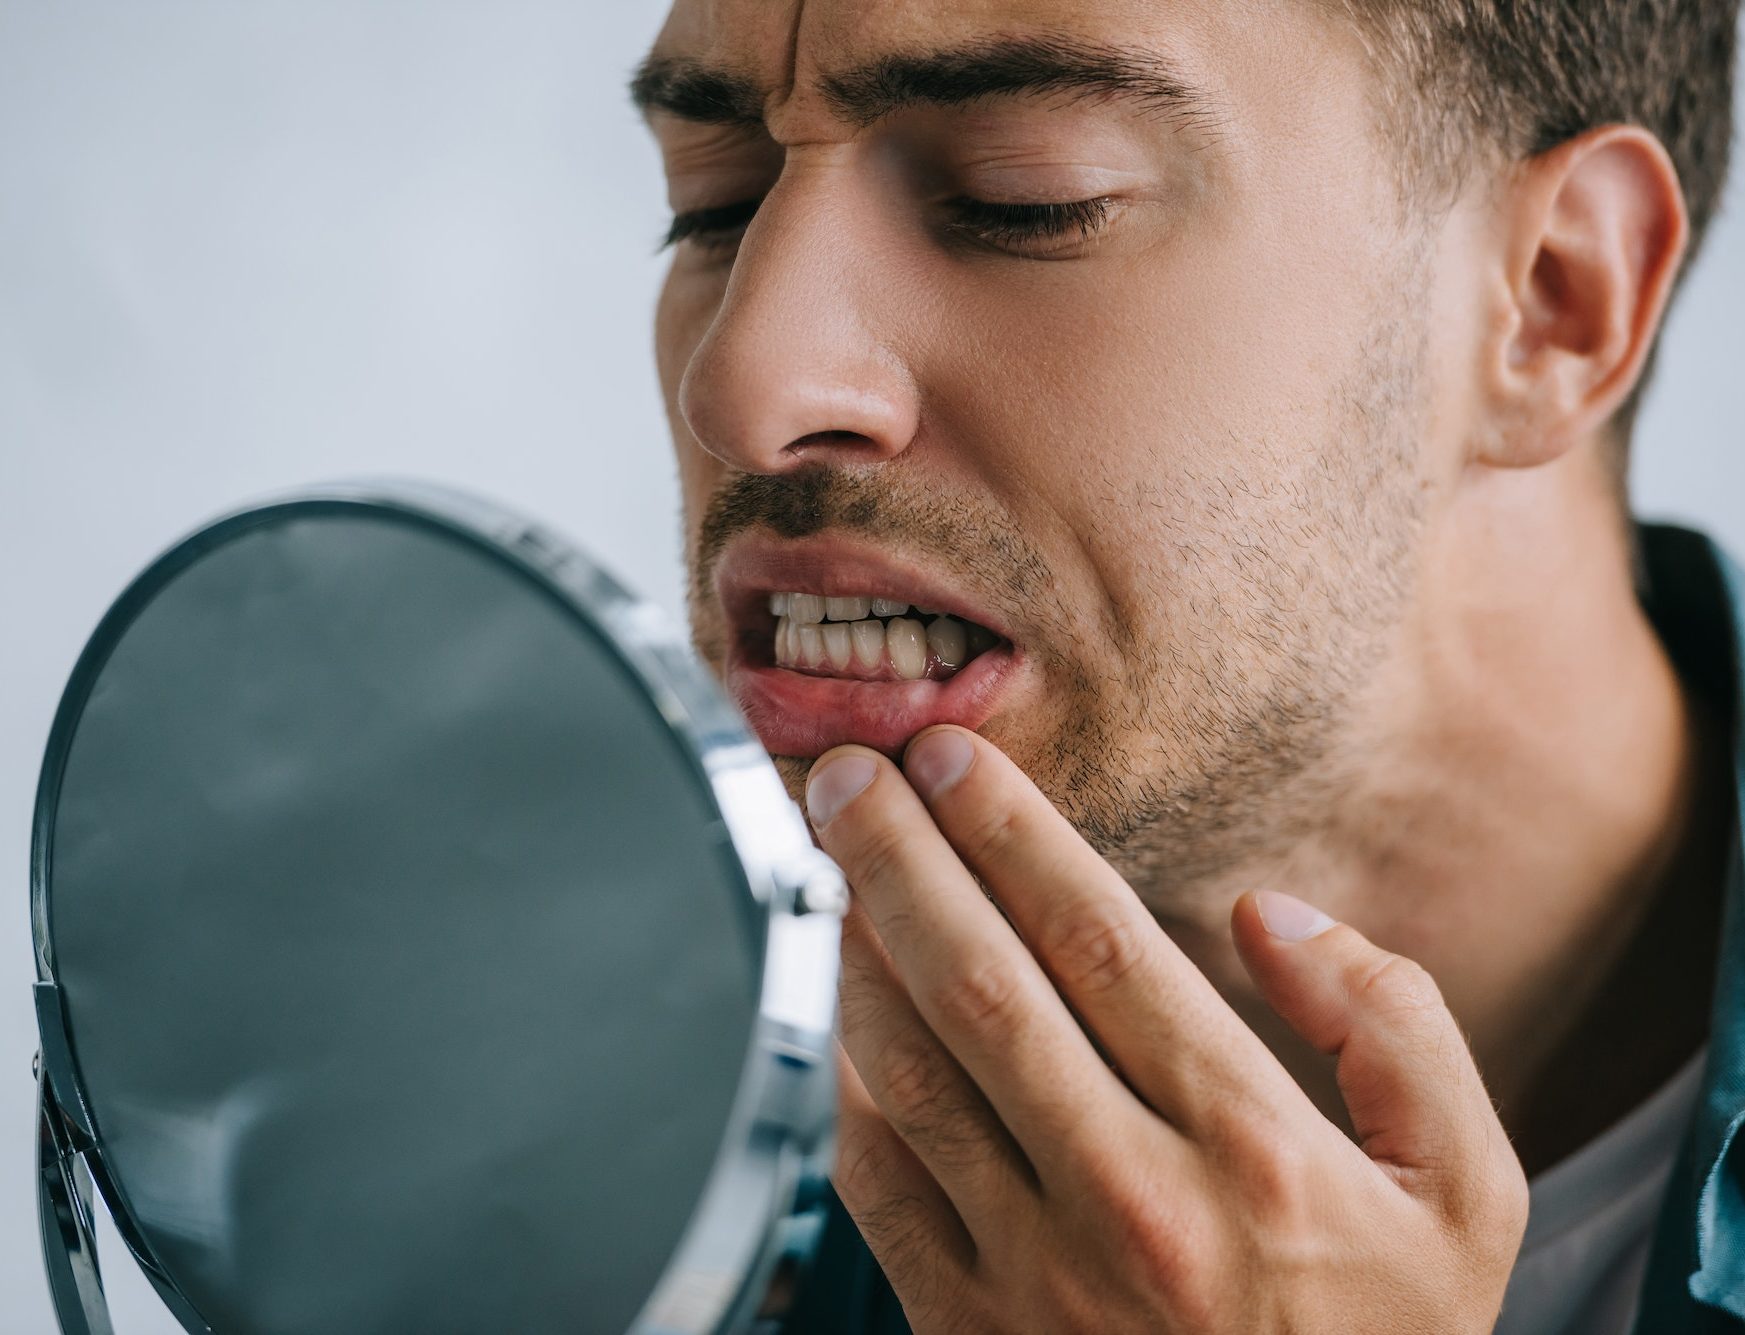 close-up view of young man with tooth pain looking at mirror